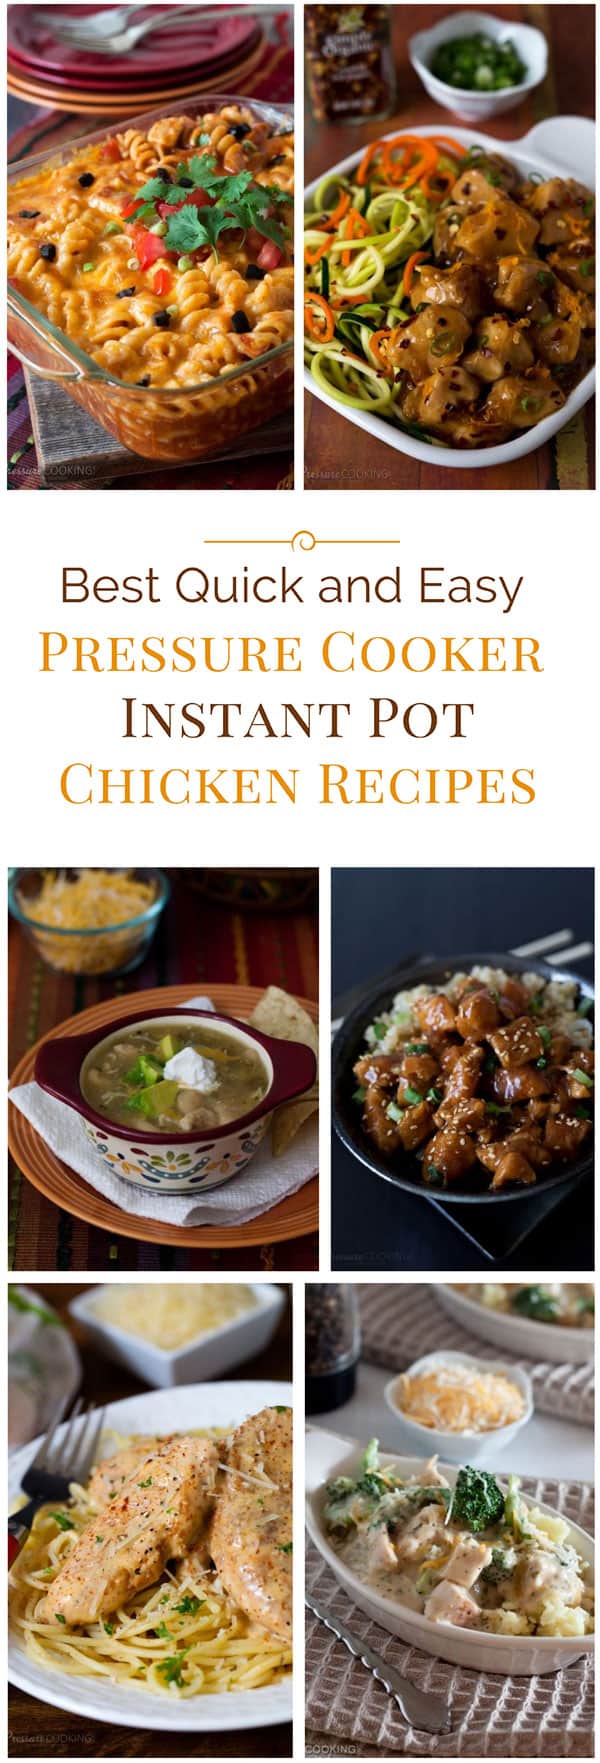 Here are the best quick and easy chicken recipes for your pressure cooker or Instant Pot!